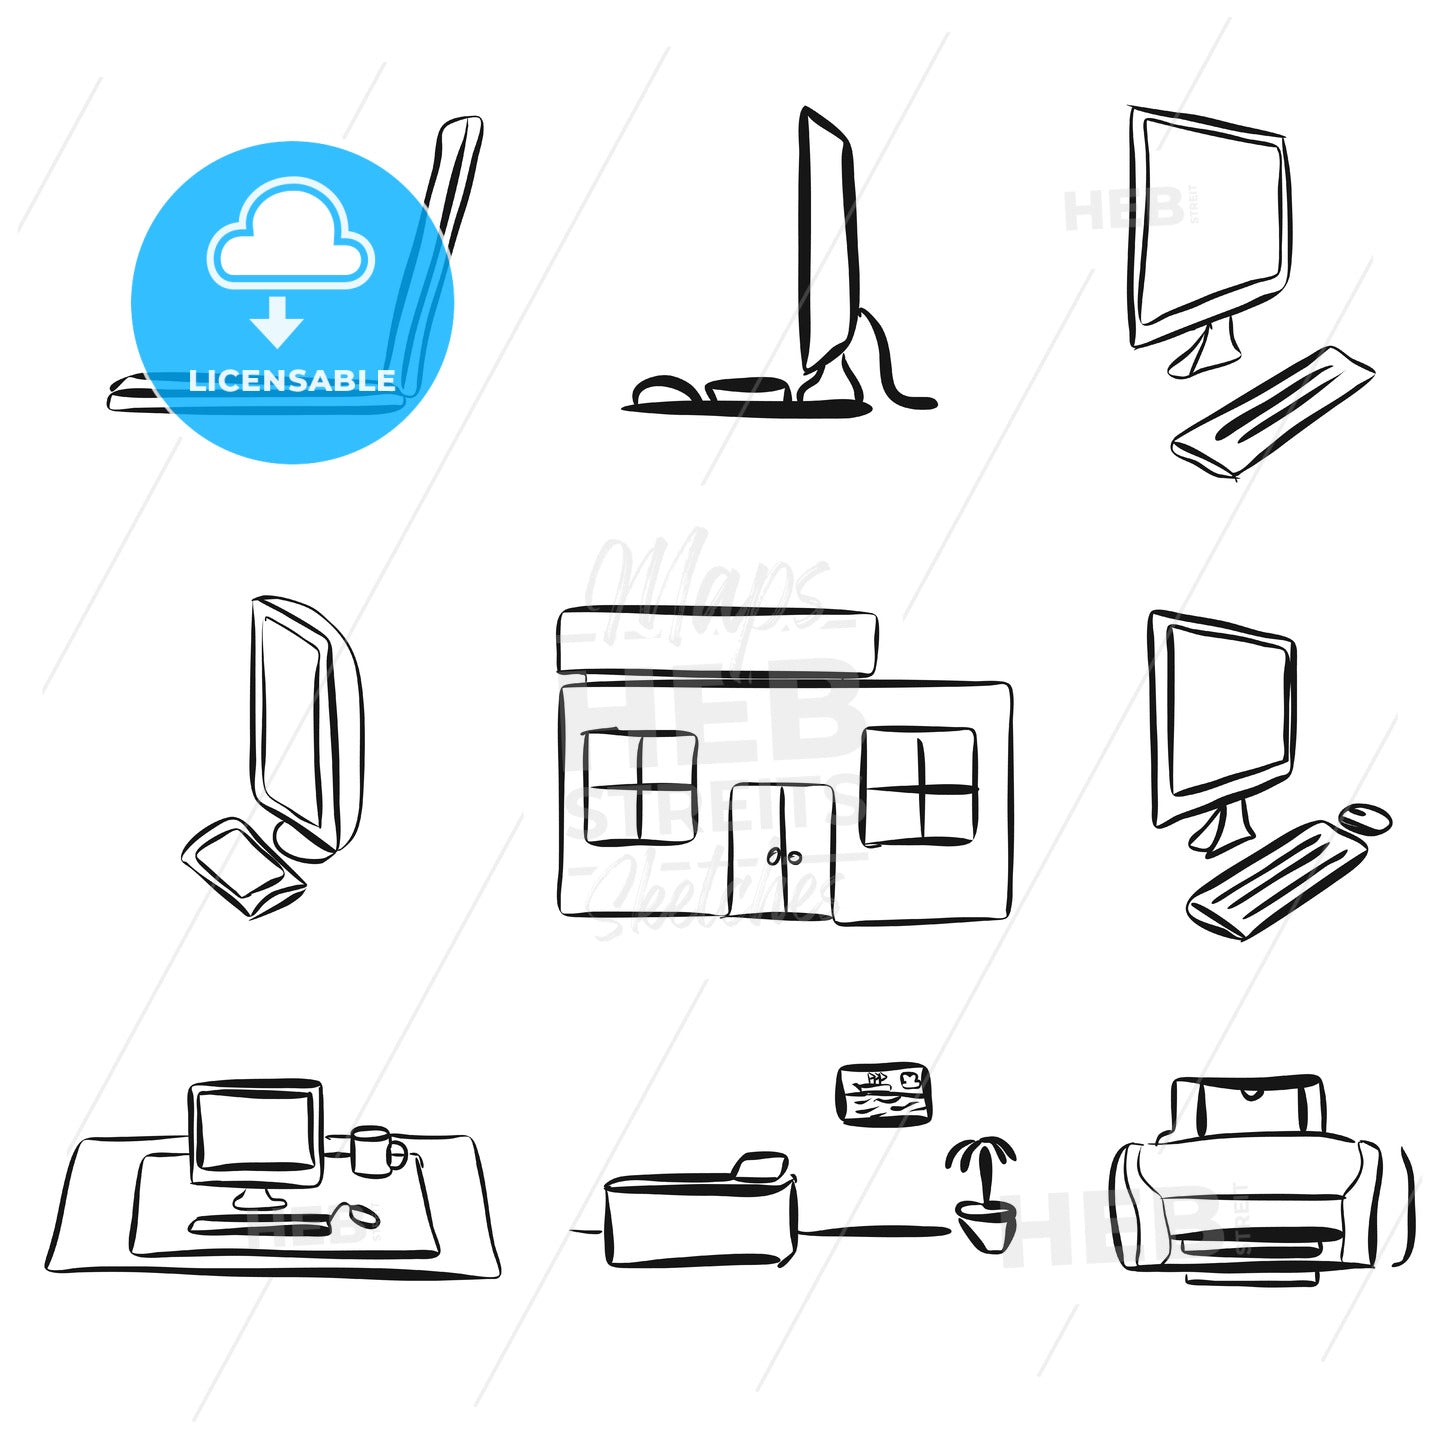 Sketches of Laptops and Desktop PC – instant download